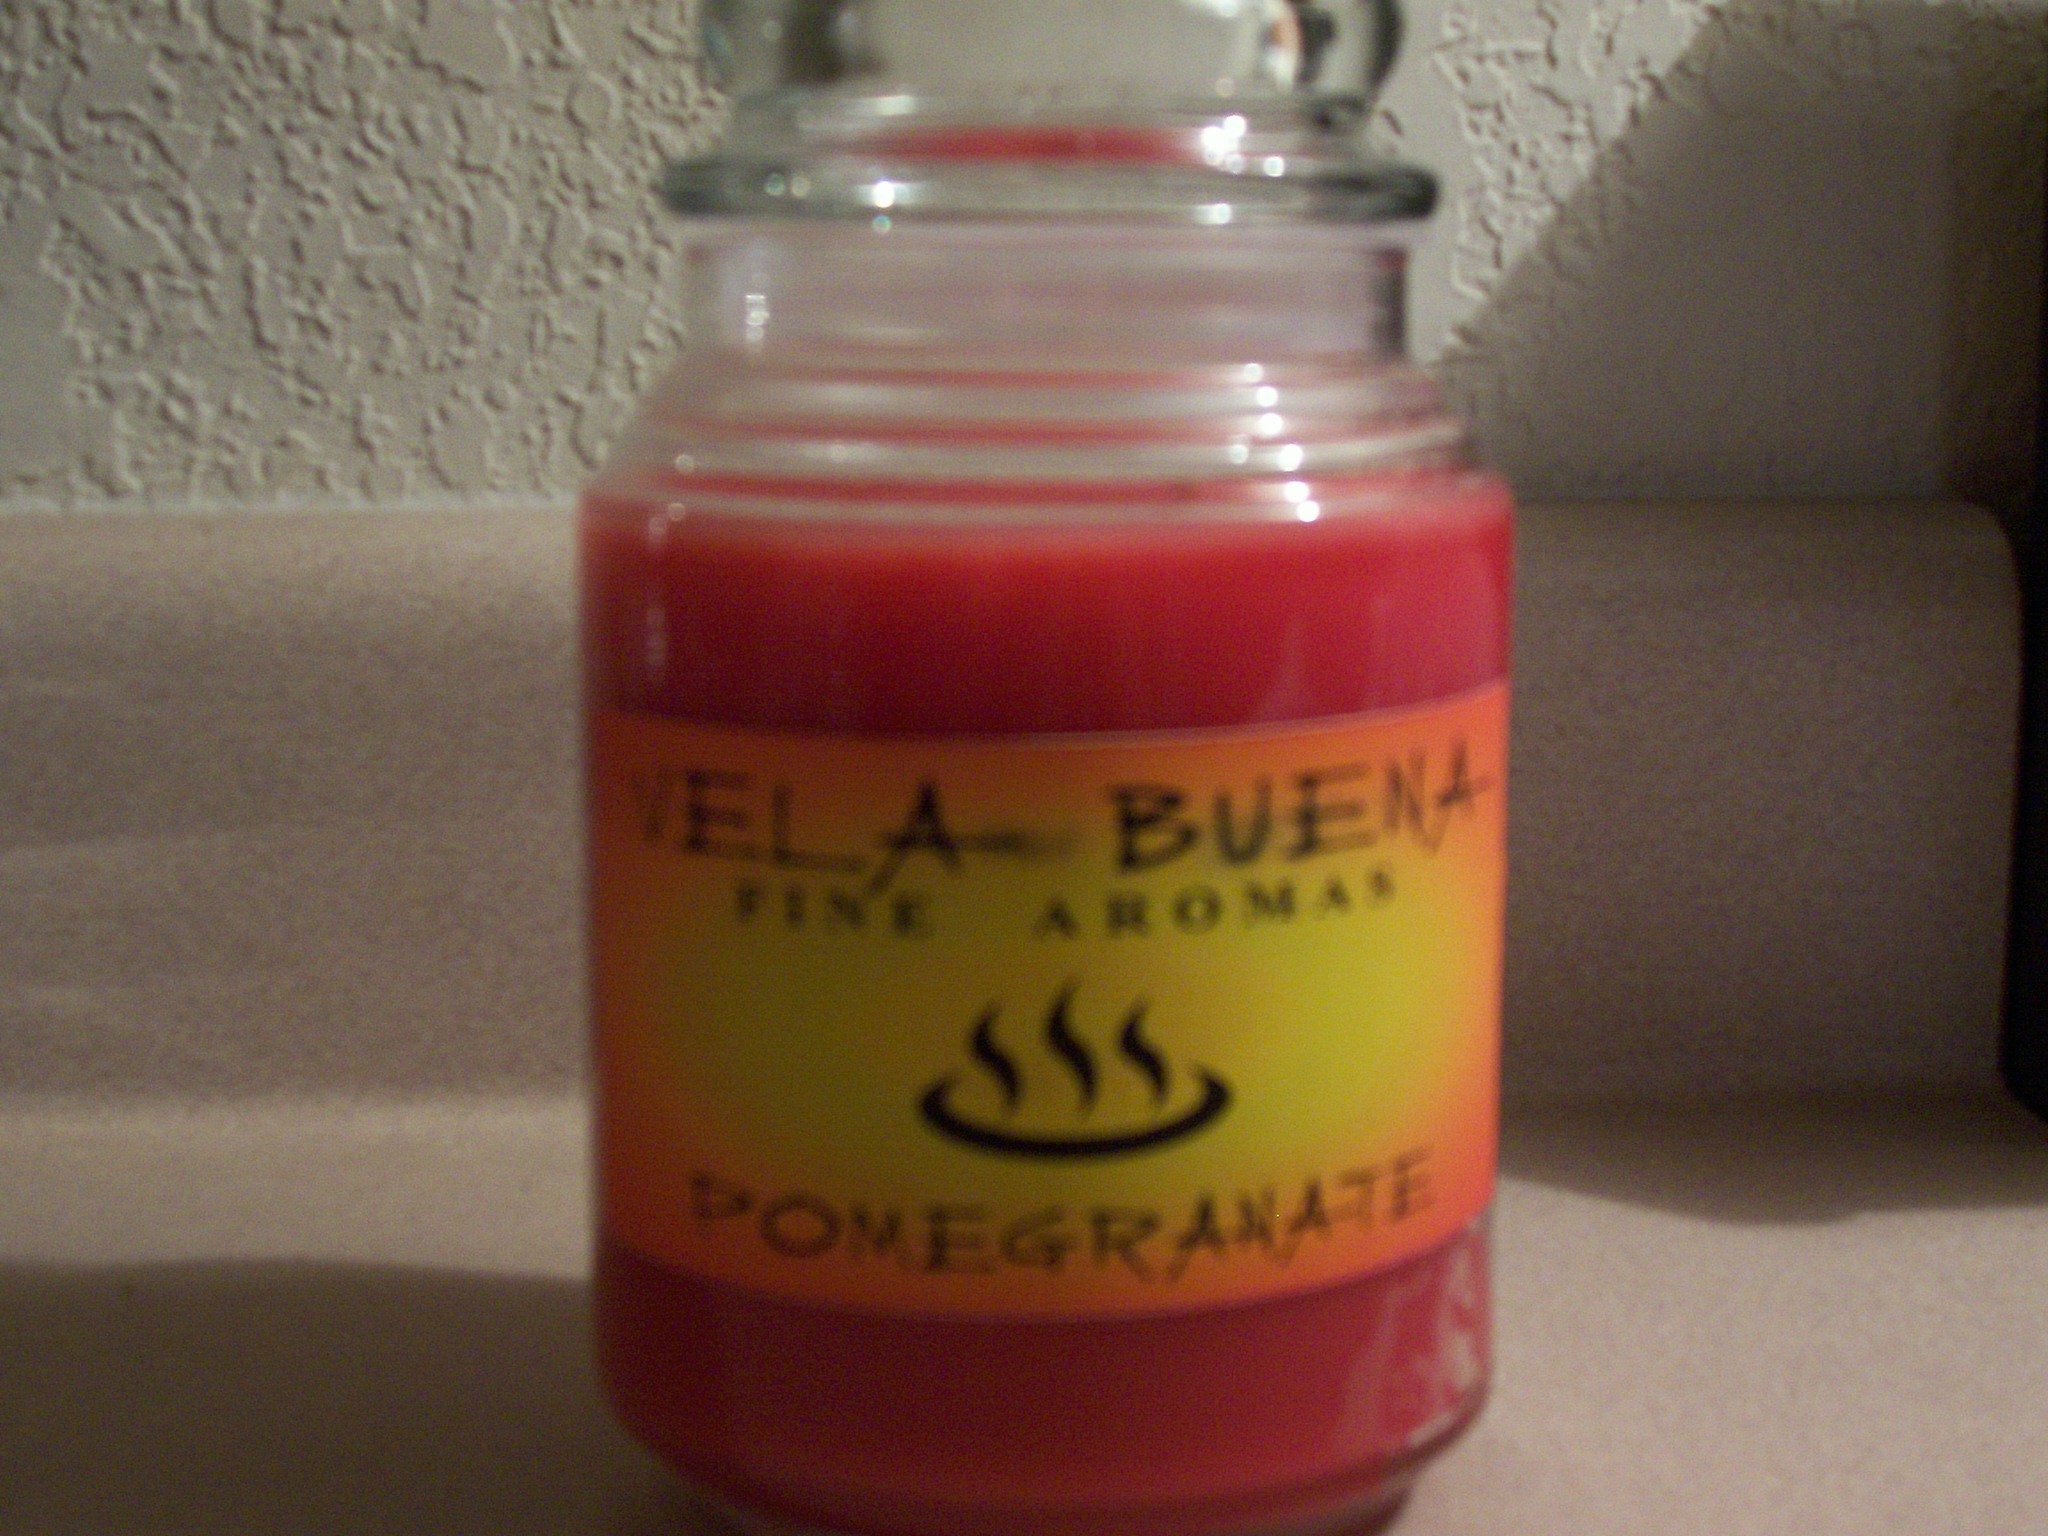 Vela Buena Scented Candles